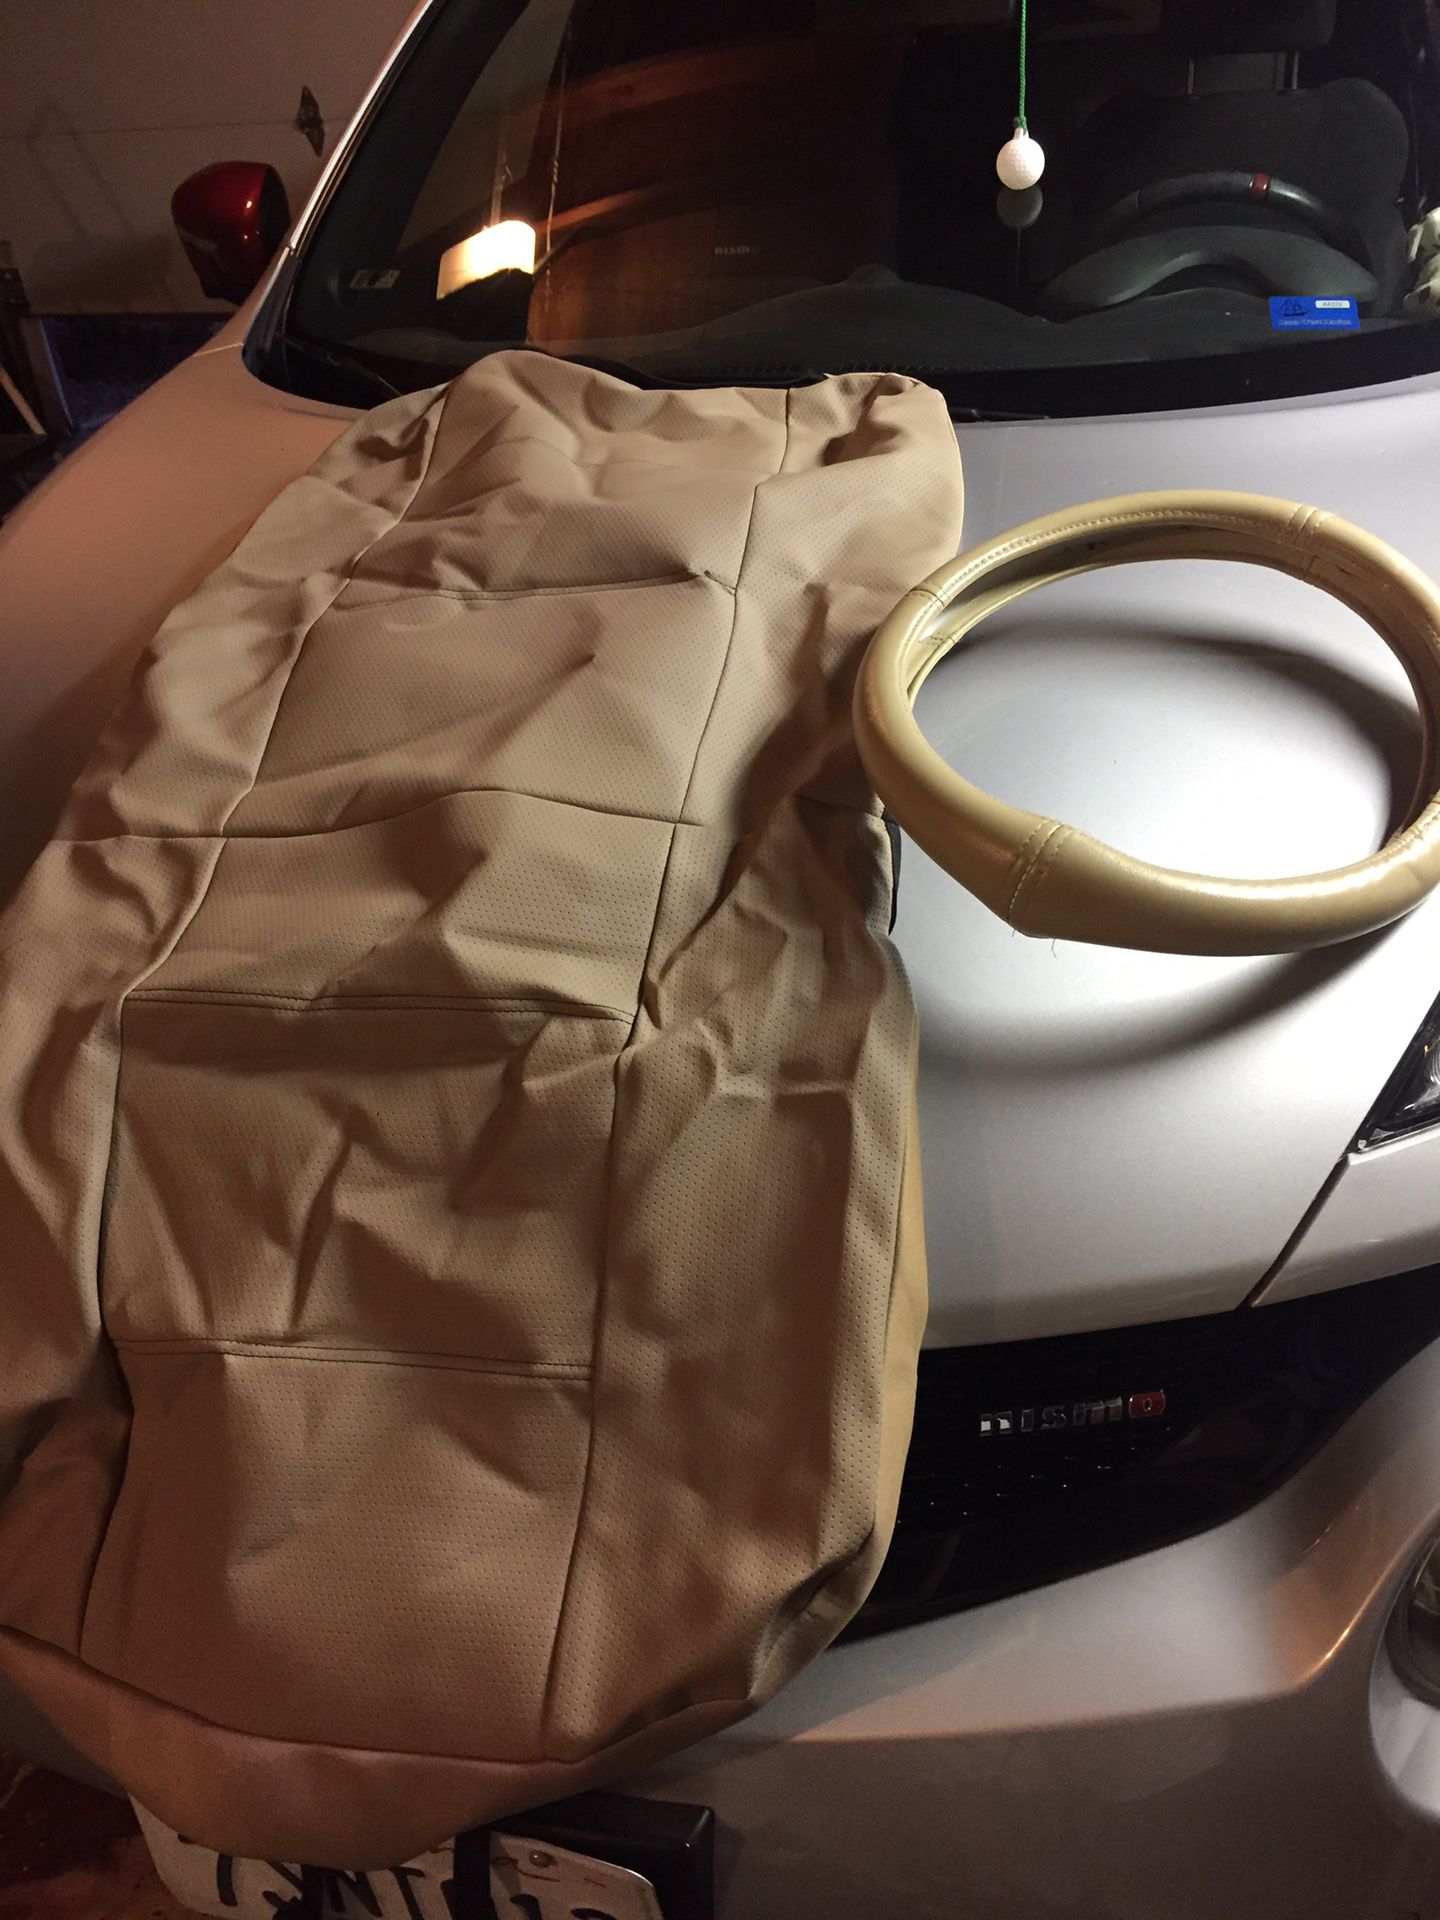 Free Car seat covers and steering wheel cover